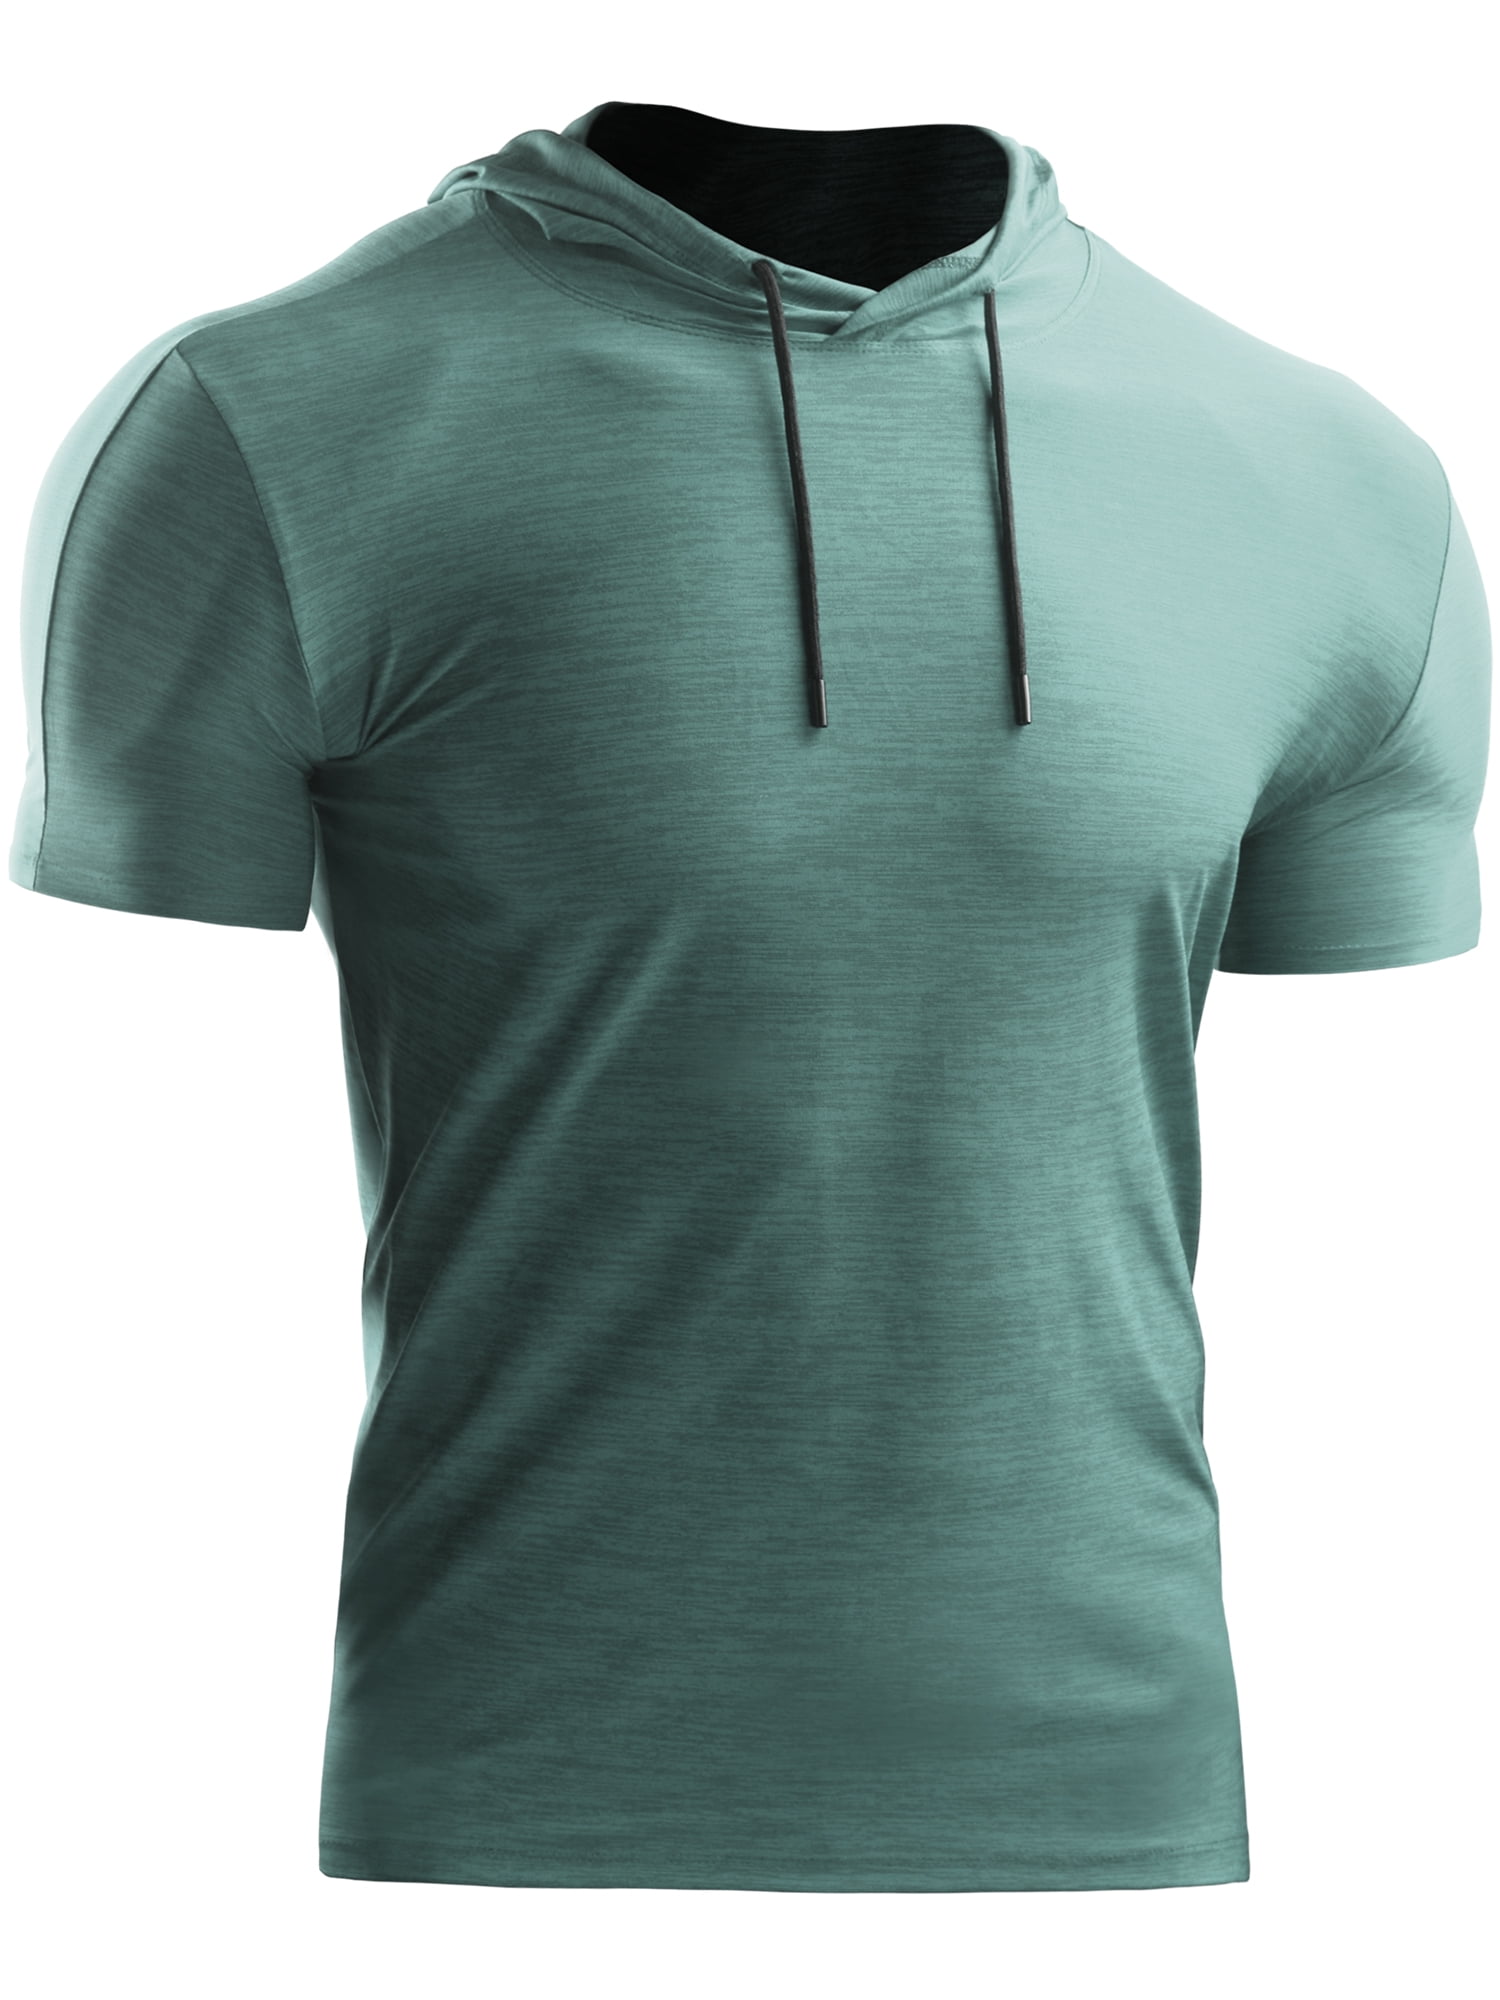 A Mens Muscle Athletic Hoodies T-Shirts Fashion Short Sleeve Sport Sweatshirt Hipster Hip Hop Pullover Gym Workout Tops